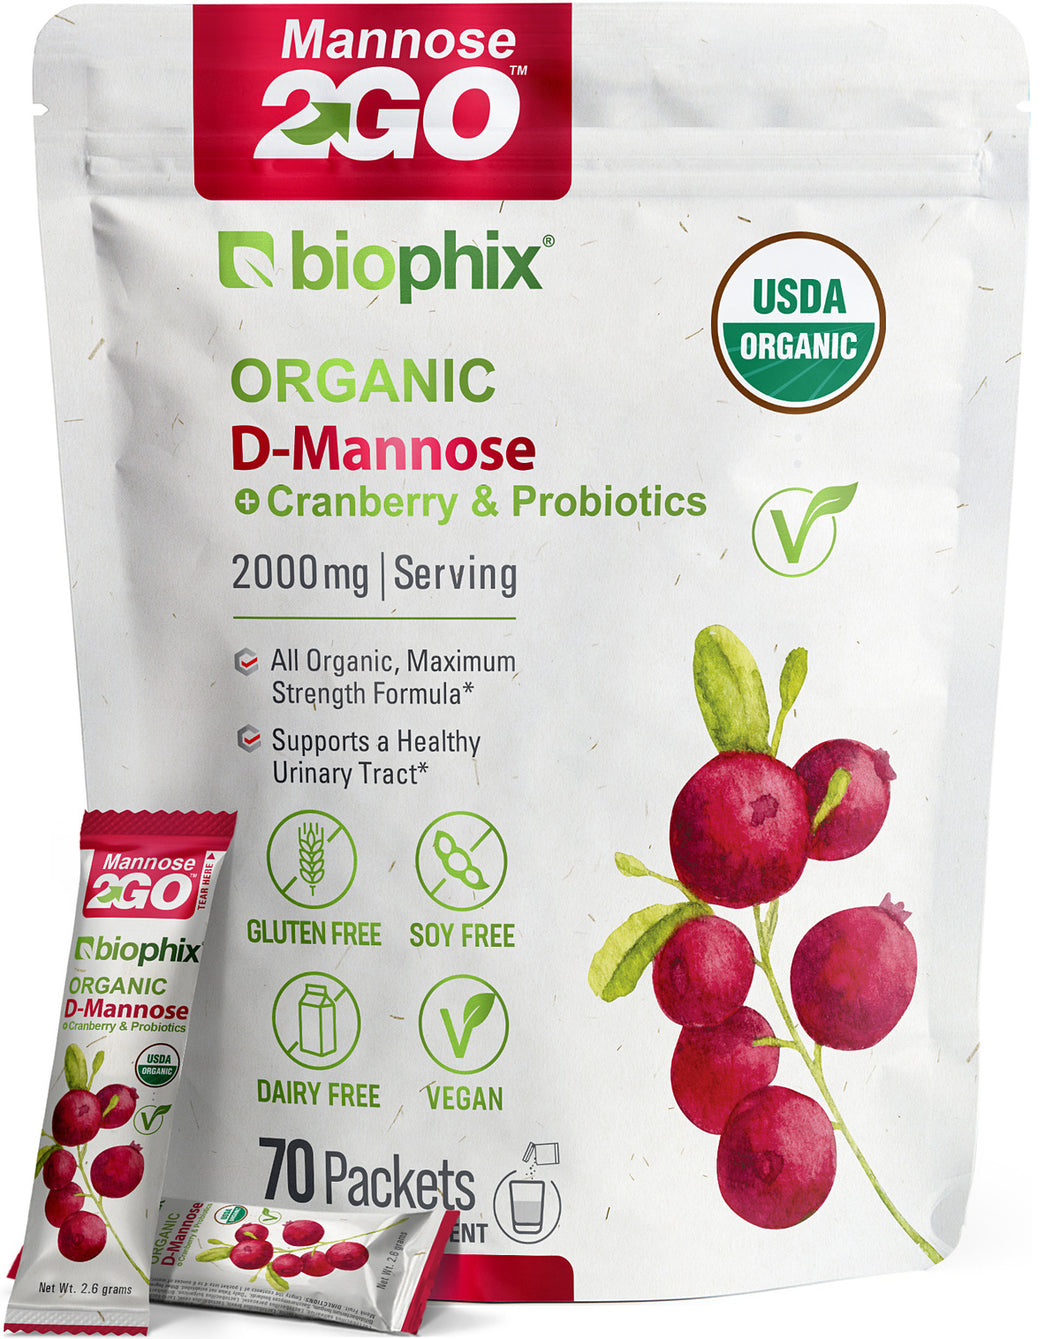 Mannose2GO USDA Organic D-Mannose with Probiotics 2000 mg 70 Packets